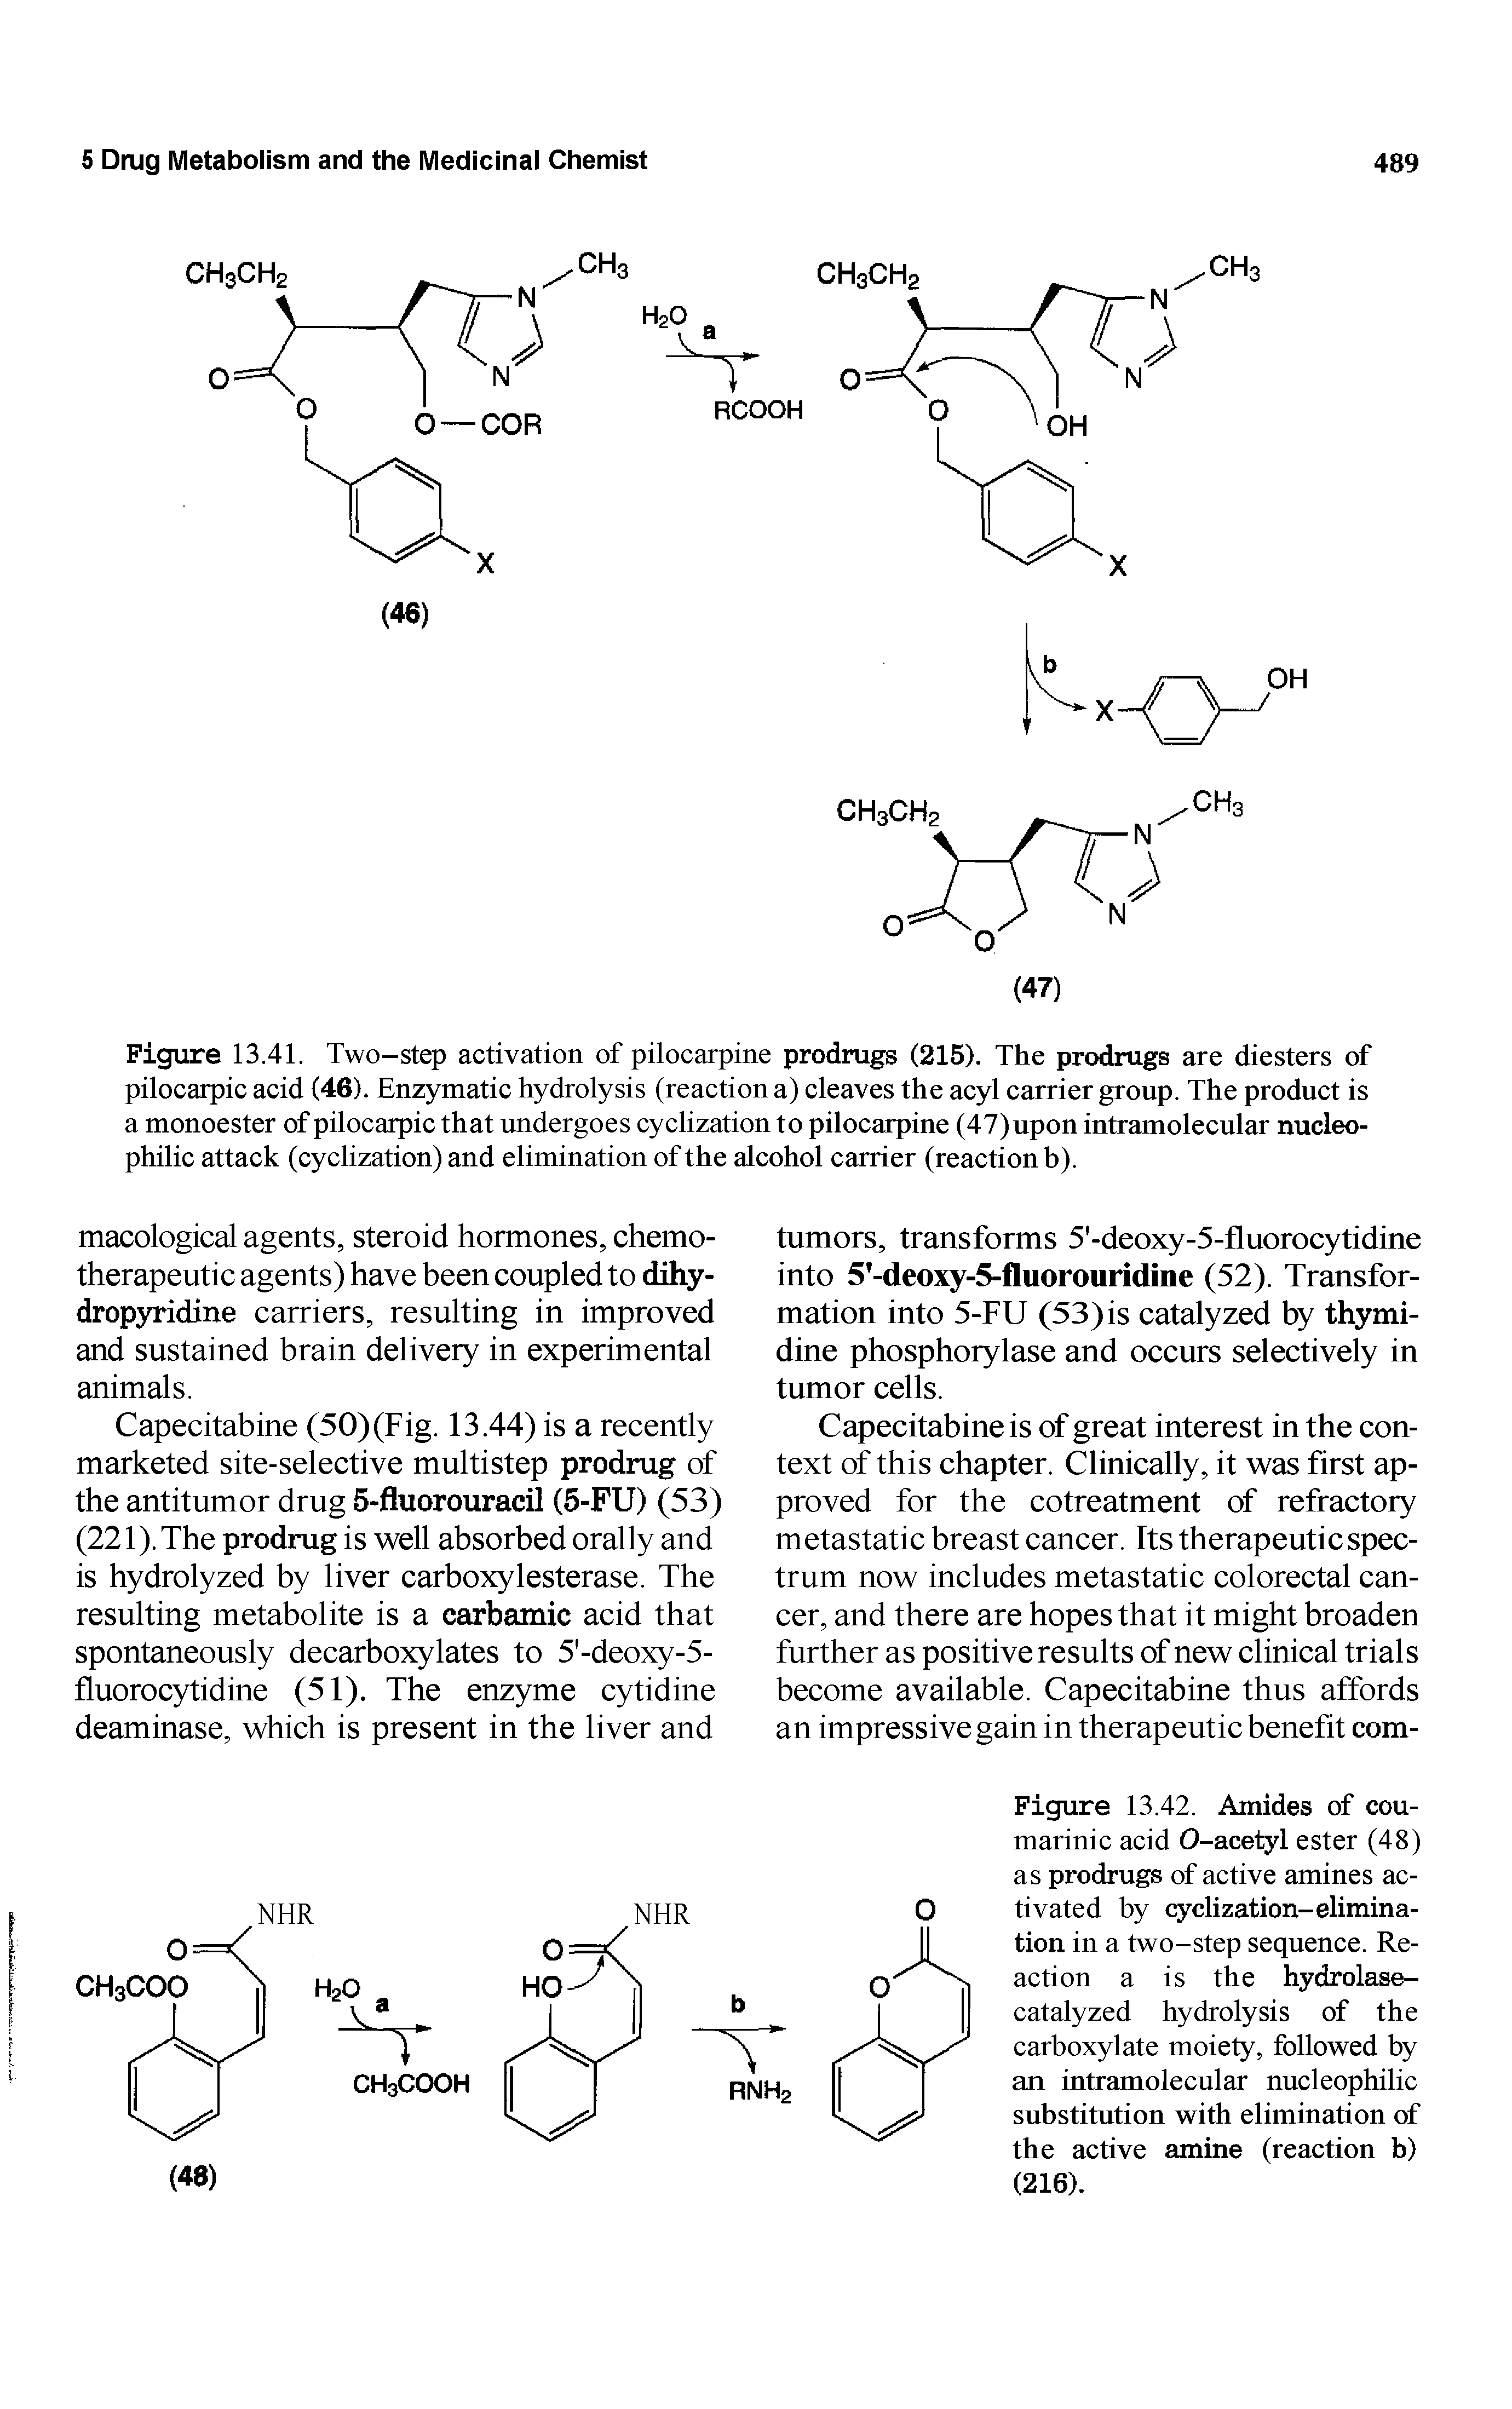 Figure 13.41. Two-step activation of pilocarpine prodrugs (215). The prodrugs are diesters of pilocarpic acid (46). Enzymatic hydrolysis (reaction a) cleaves the acyl carrier group. The product is a monoester of pilocarpic that undergoes cyclization to pilocarpine (47) upon intramolecular nucleophilic attack (cyclization) and elimination of the alcohol carrier (reaction b).